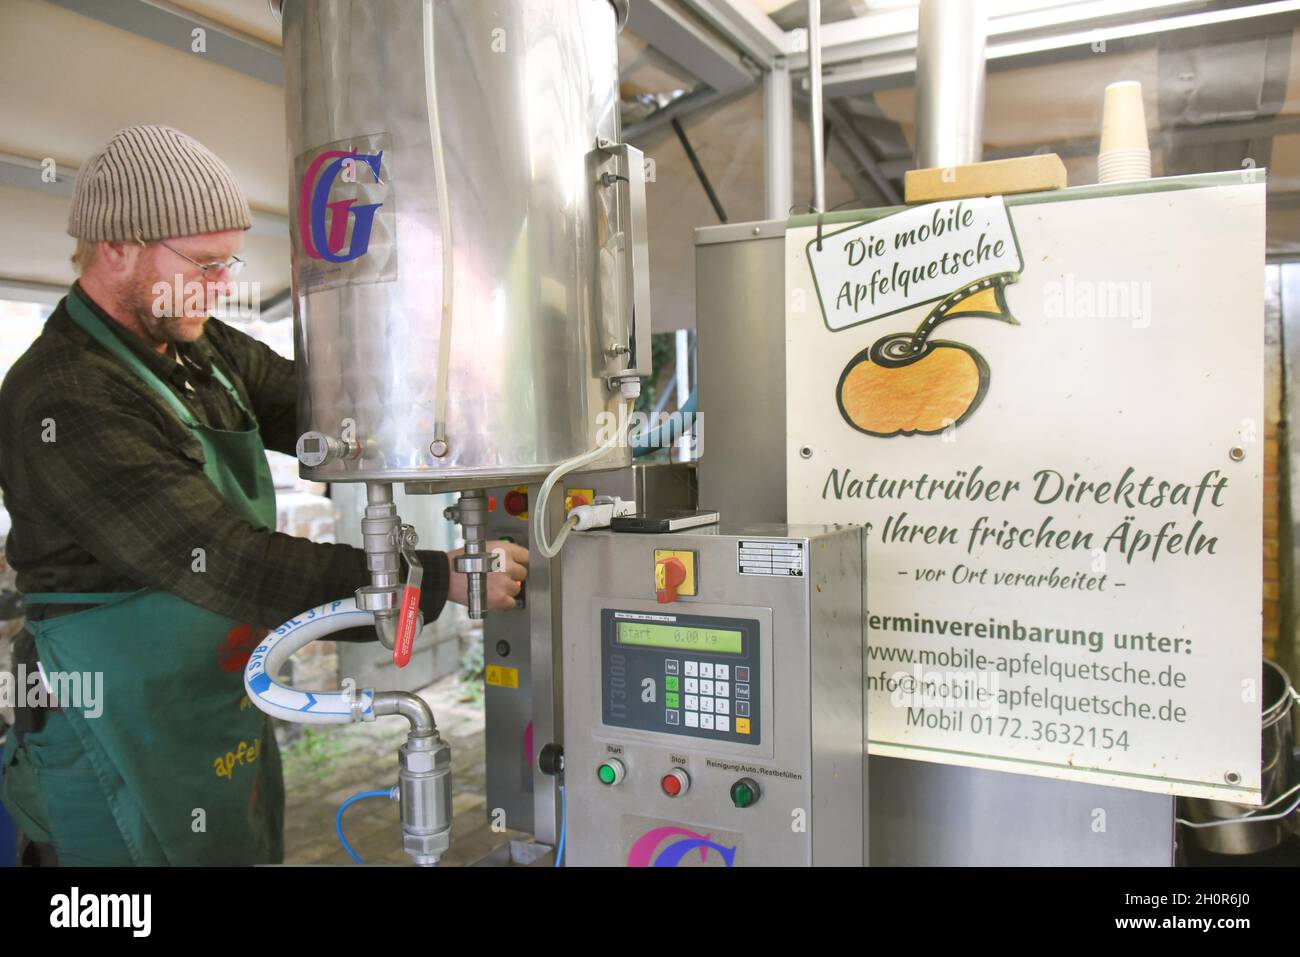 11 October 2021, Saxony, Fuchshain Bei Leipzig: The Leipzig garden and landscape builder Andreas Richter (r), who has set up his mobile apple crusher for one day on a farm in Fuchshain, checks freshly squeezed apple juice from fruit brought by his customers. In front of the eyes of his customers, the small fruit factory on wheels will be processing the vitamin-rich fruit into naturally cloudy direct juice in various locations until the end of October and can then be taken home in 5-liter packages. With the mobile cidery, Andreas Richter wants to contribute to the preservation, but also to the Stock Photo